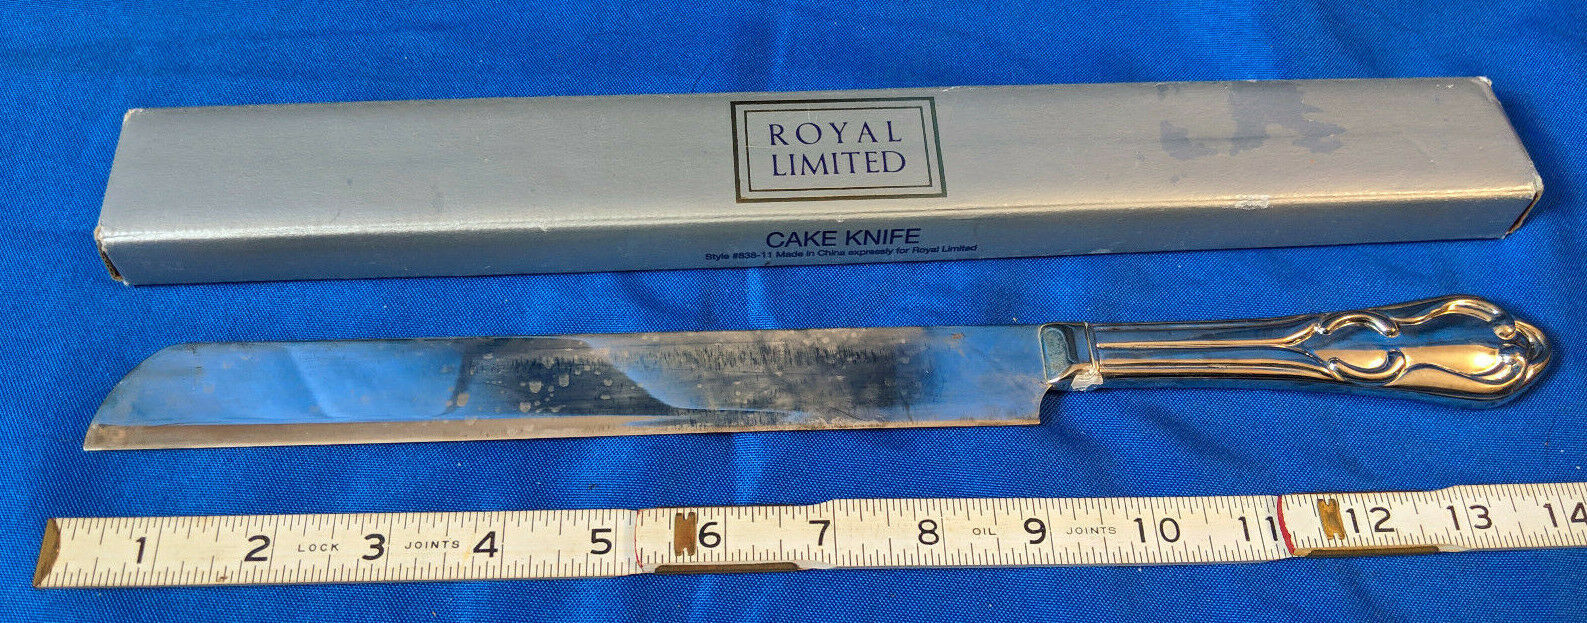 Royal Limited Silverplate in BOX Large Cake Knife 838-11 wedding VTG 14